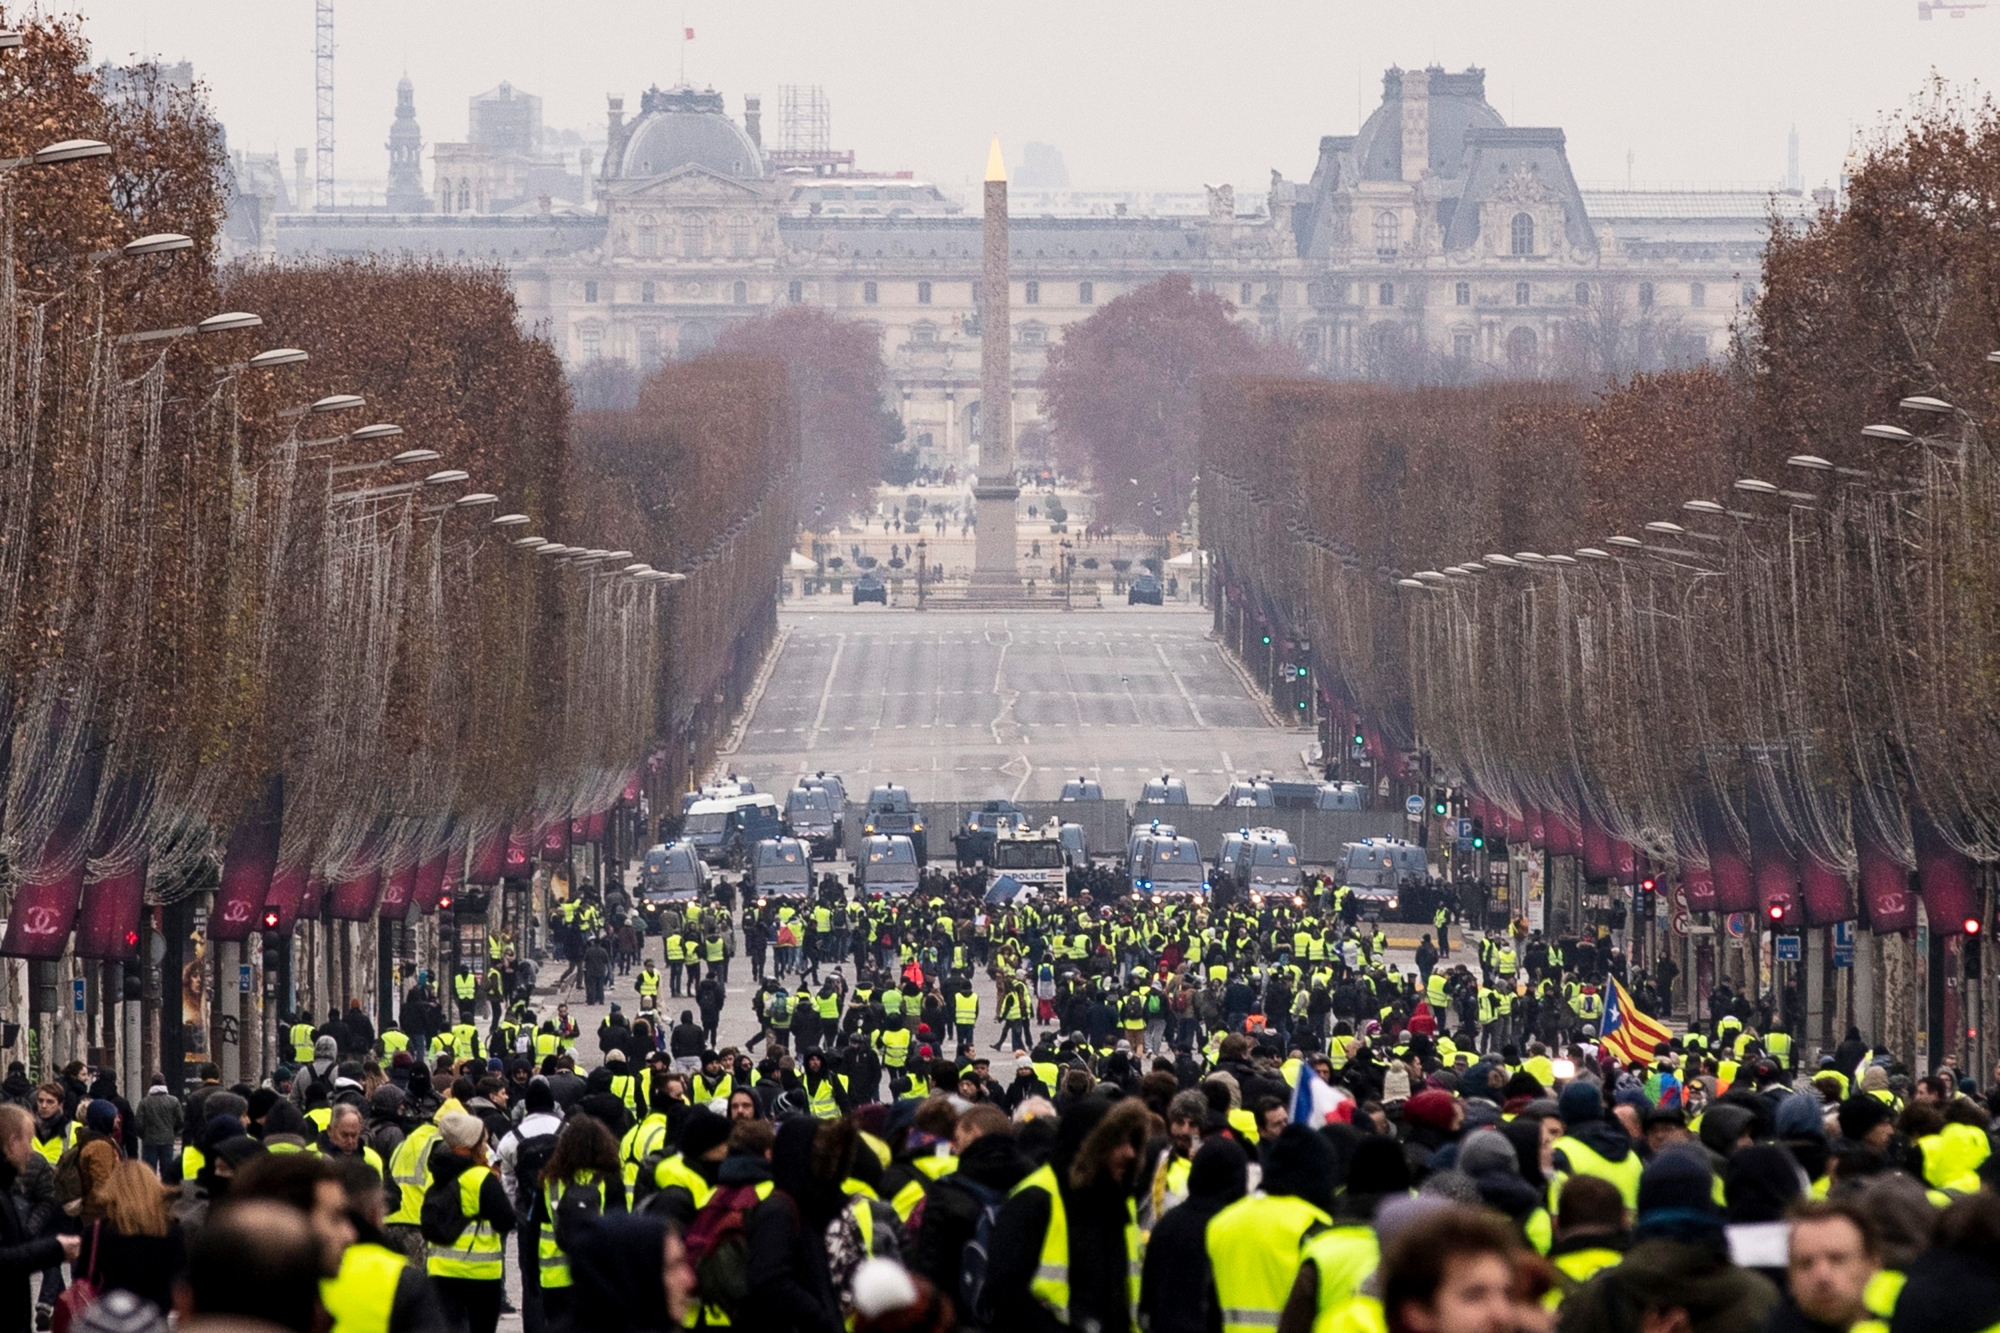 epa07233178 Protesters gather during a Yellow Vest demonstration on the Champs Elysees in Paris, France, 15 December 2018. The so-called 'gilets jaunes' (yellow vests) is a protest movement, which reportedly has no political affiliation, that continues protests across the nation over high fuel prices.  EPA/ETIENNE LAURENT FRANCE PROTEST YELLOW VESTS